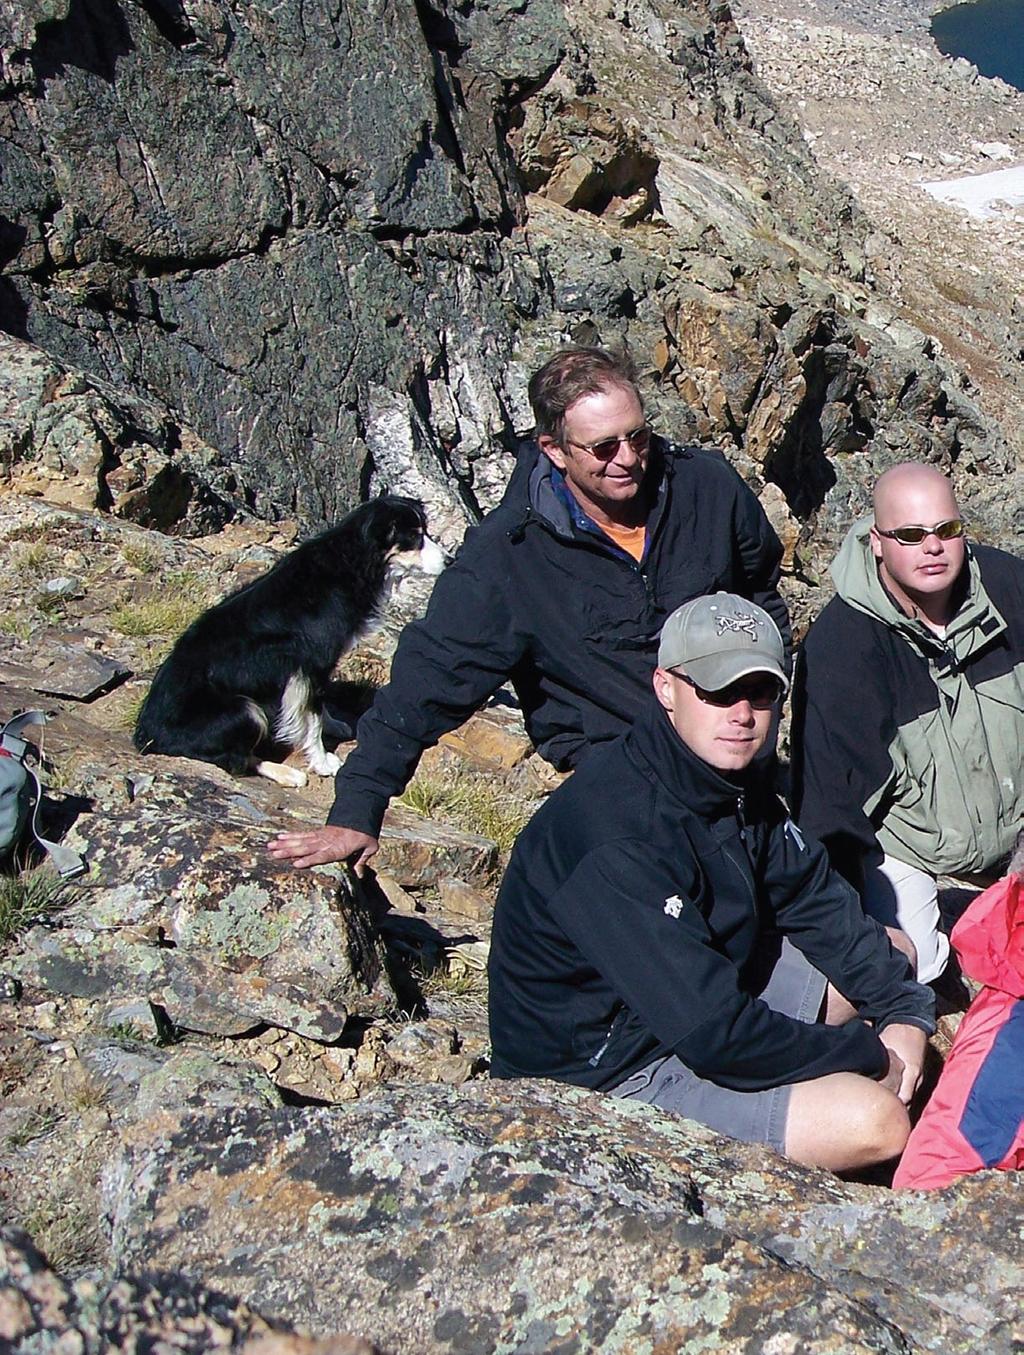 More than 12,000 feet up, the summit team gathers on the Continental Divide.